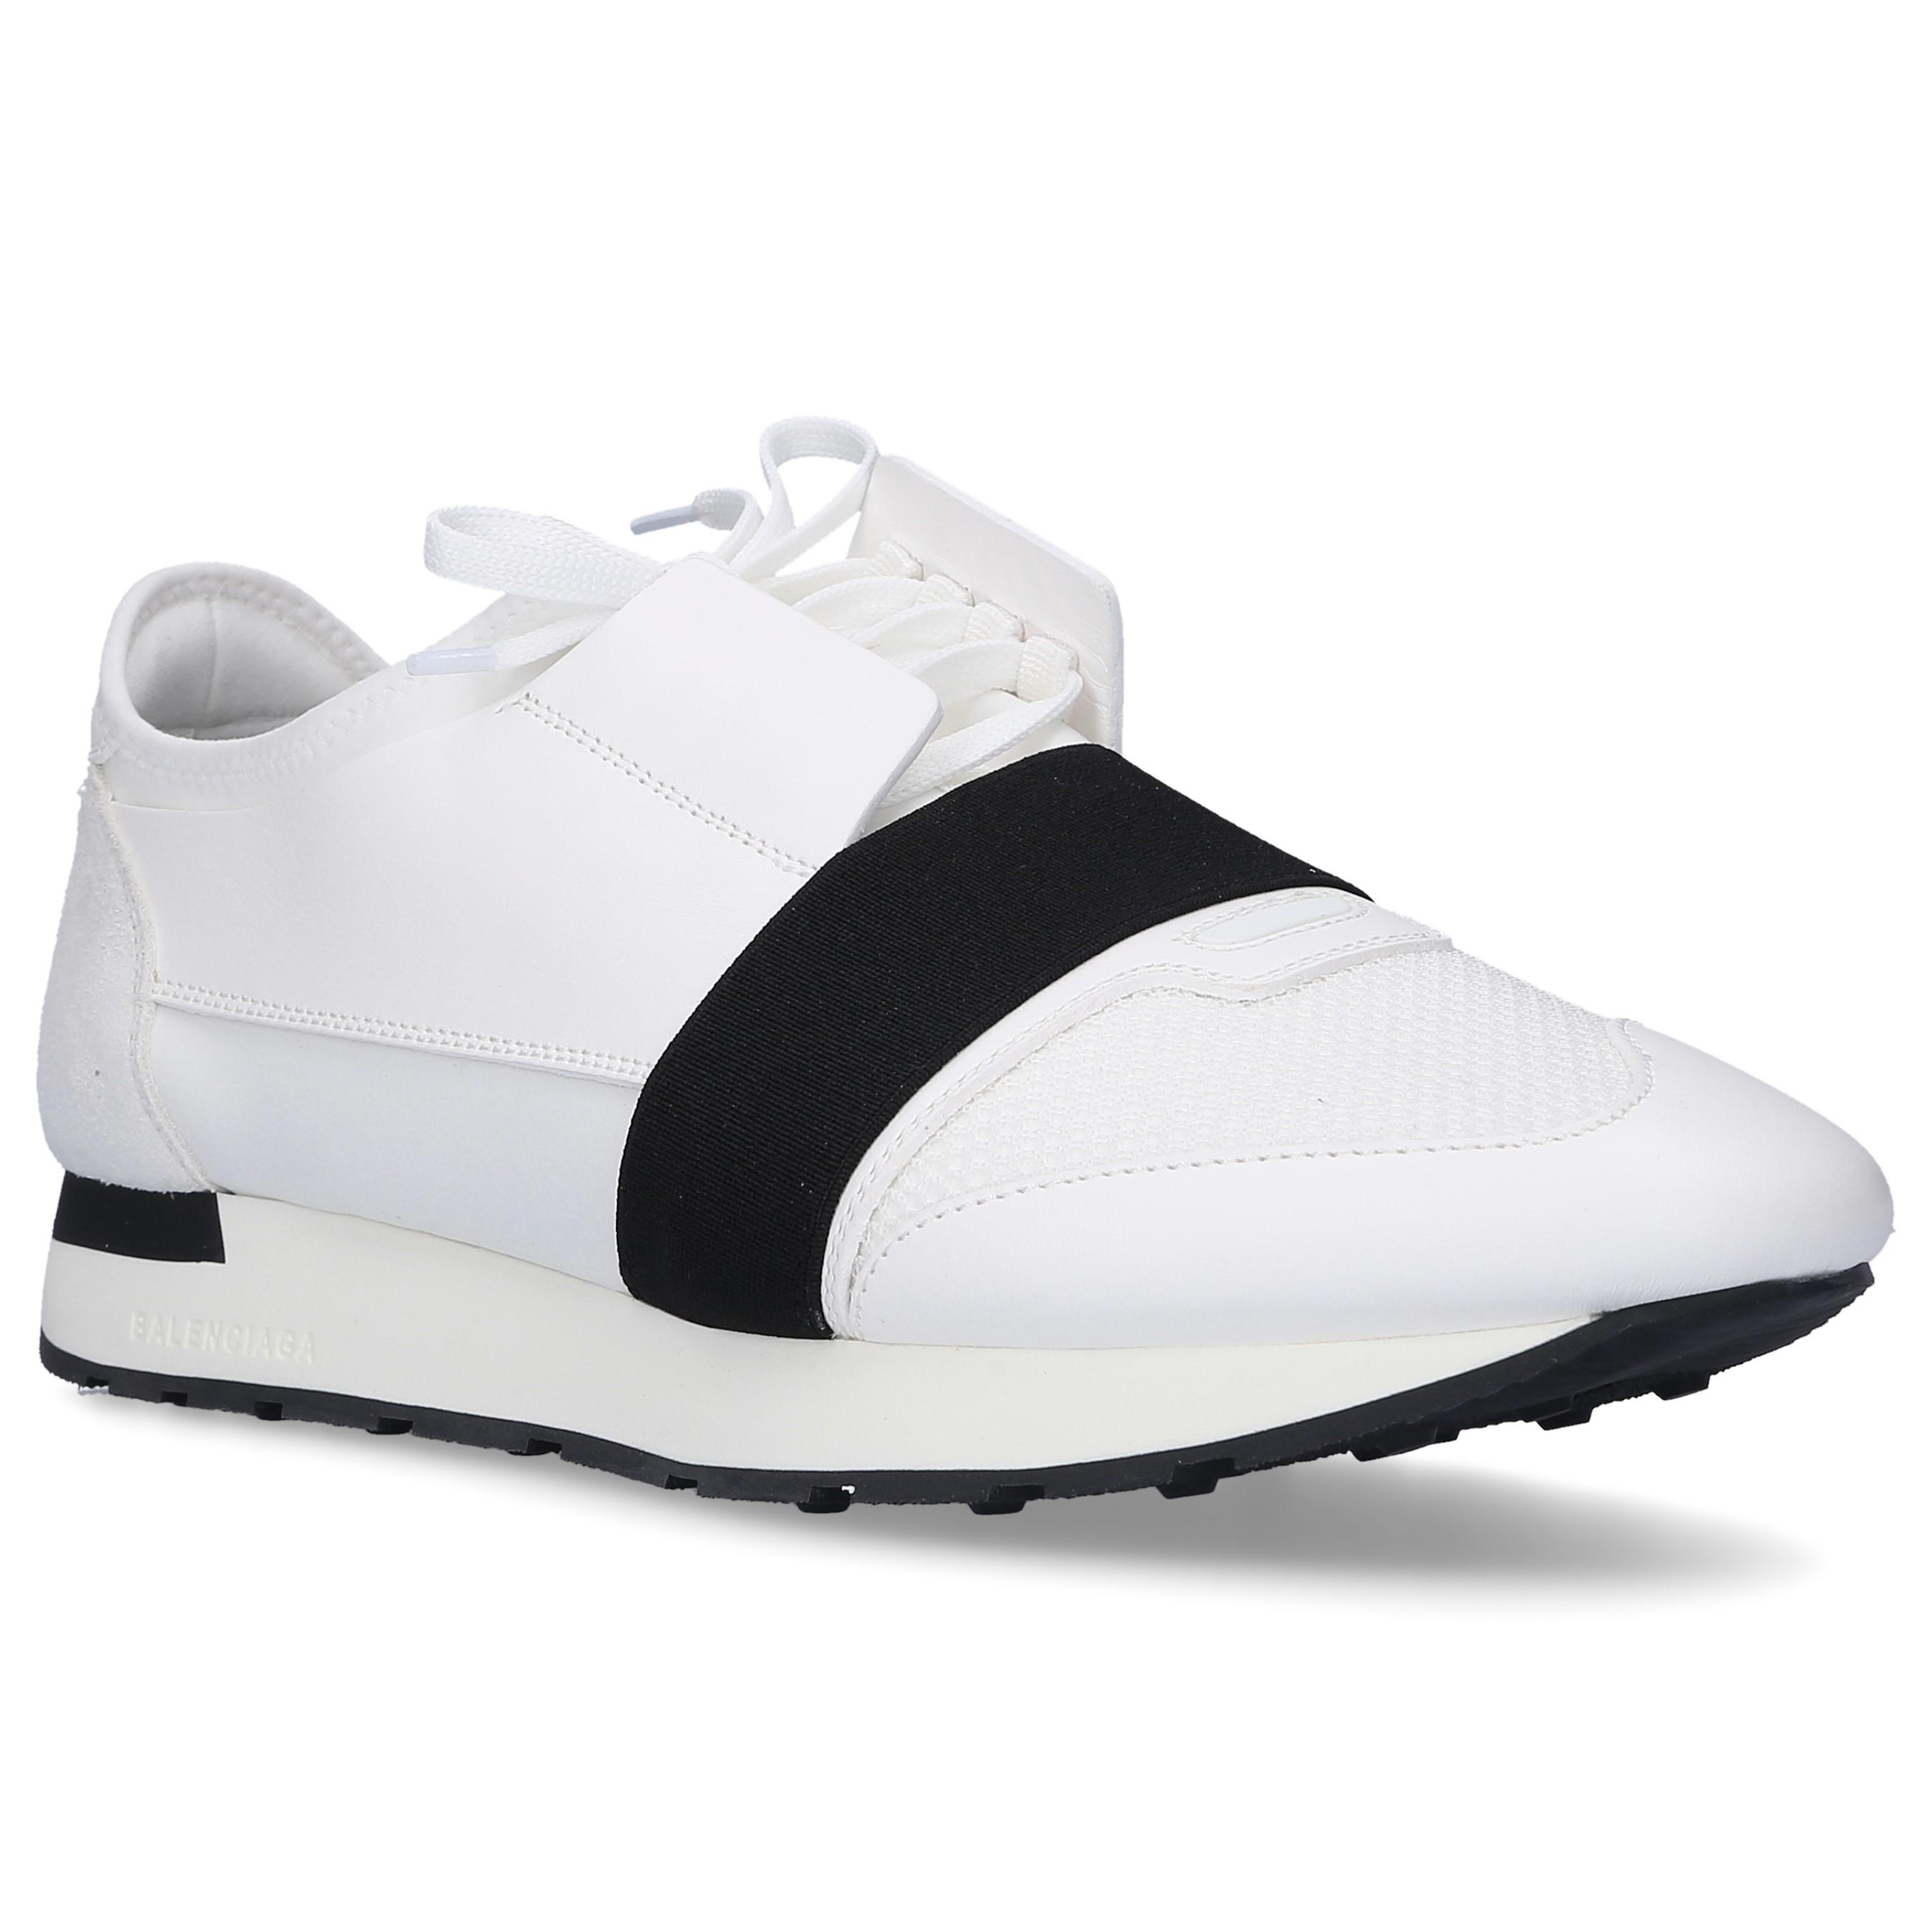 Balenciaga Rubber Race Runner Sneakers in White - Save 49% | Lyst